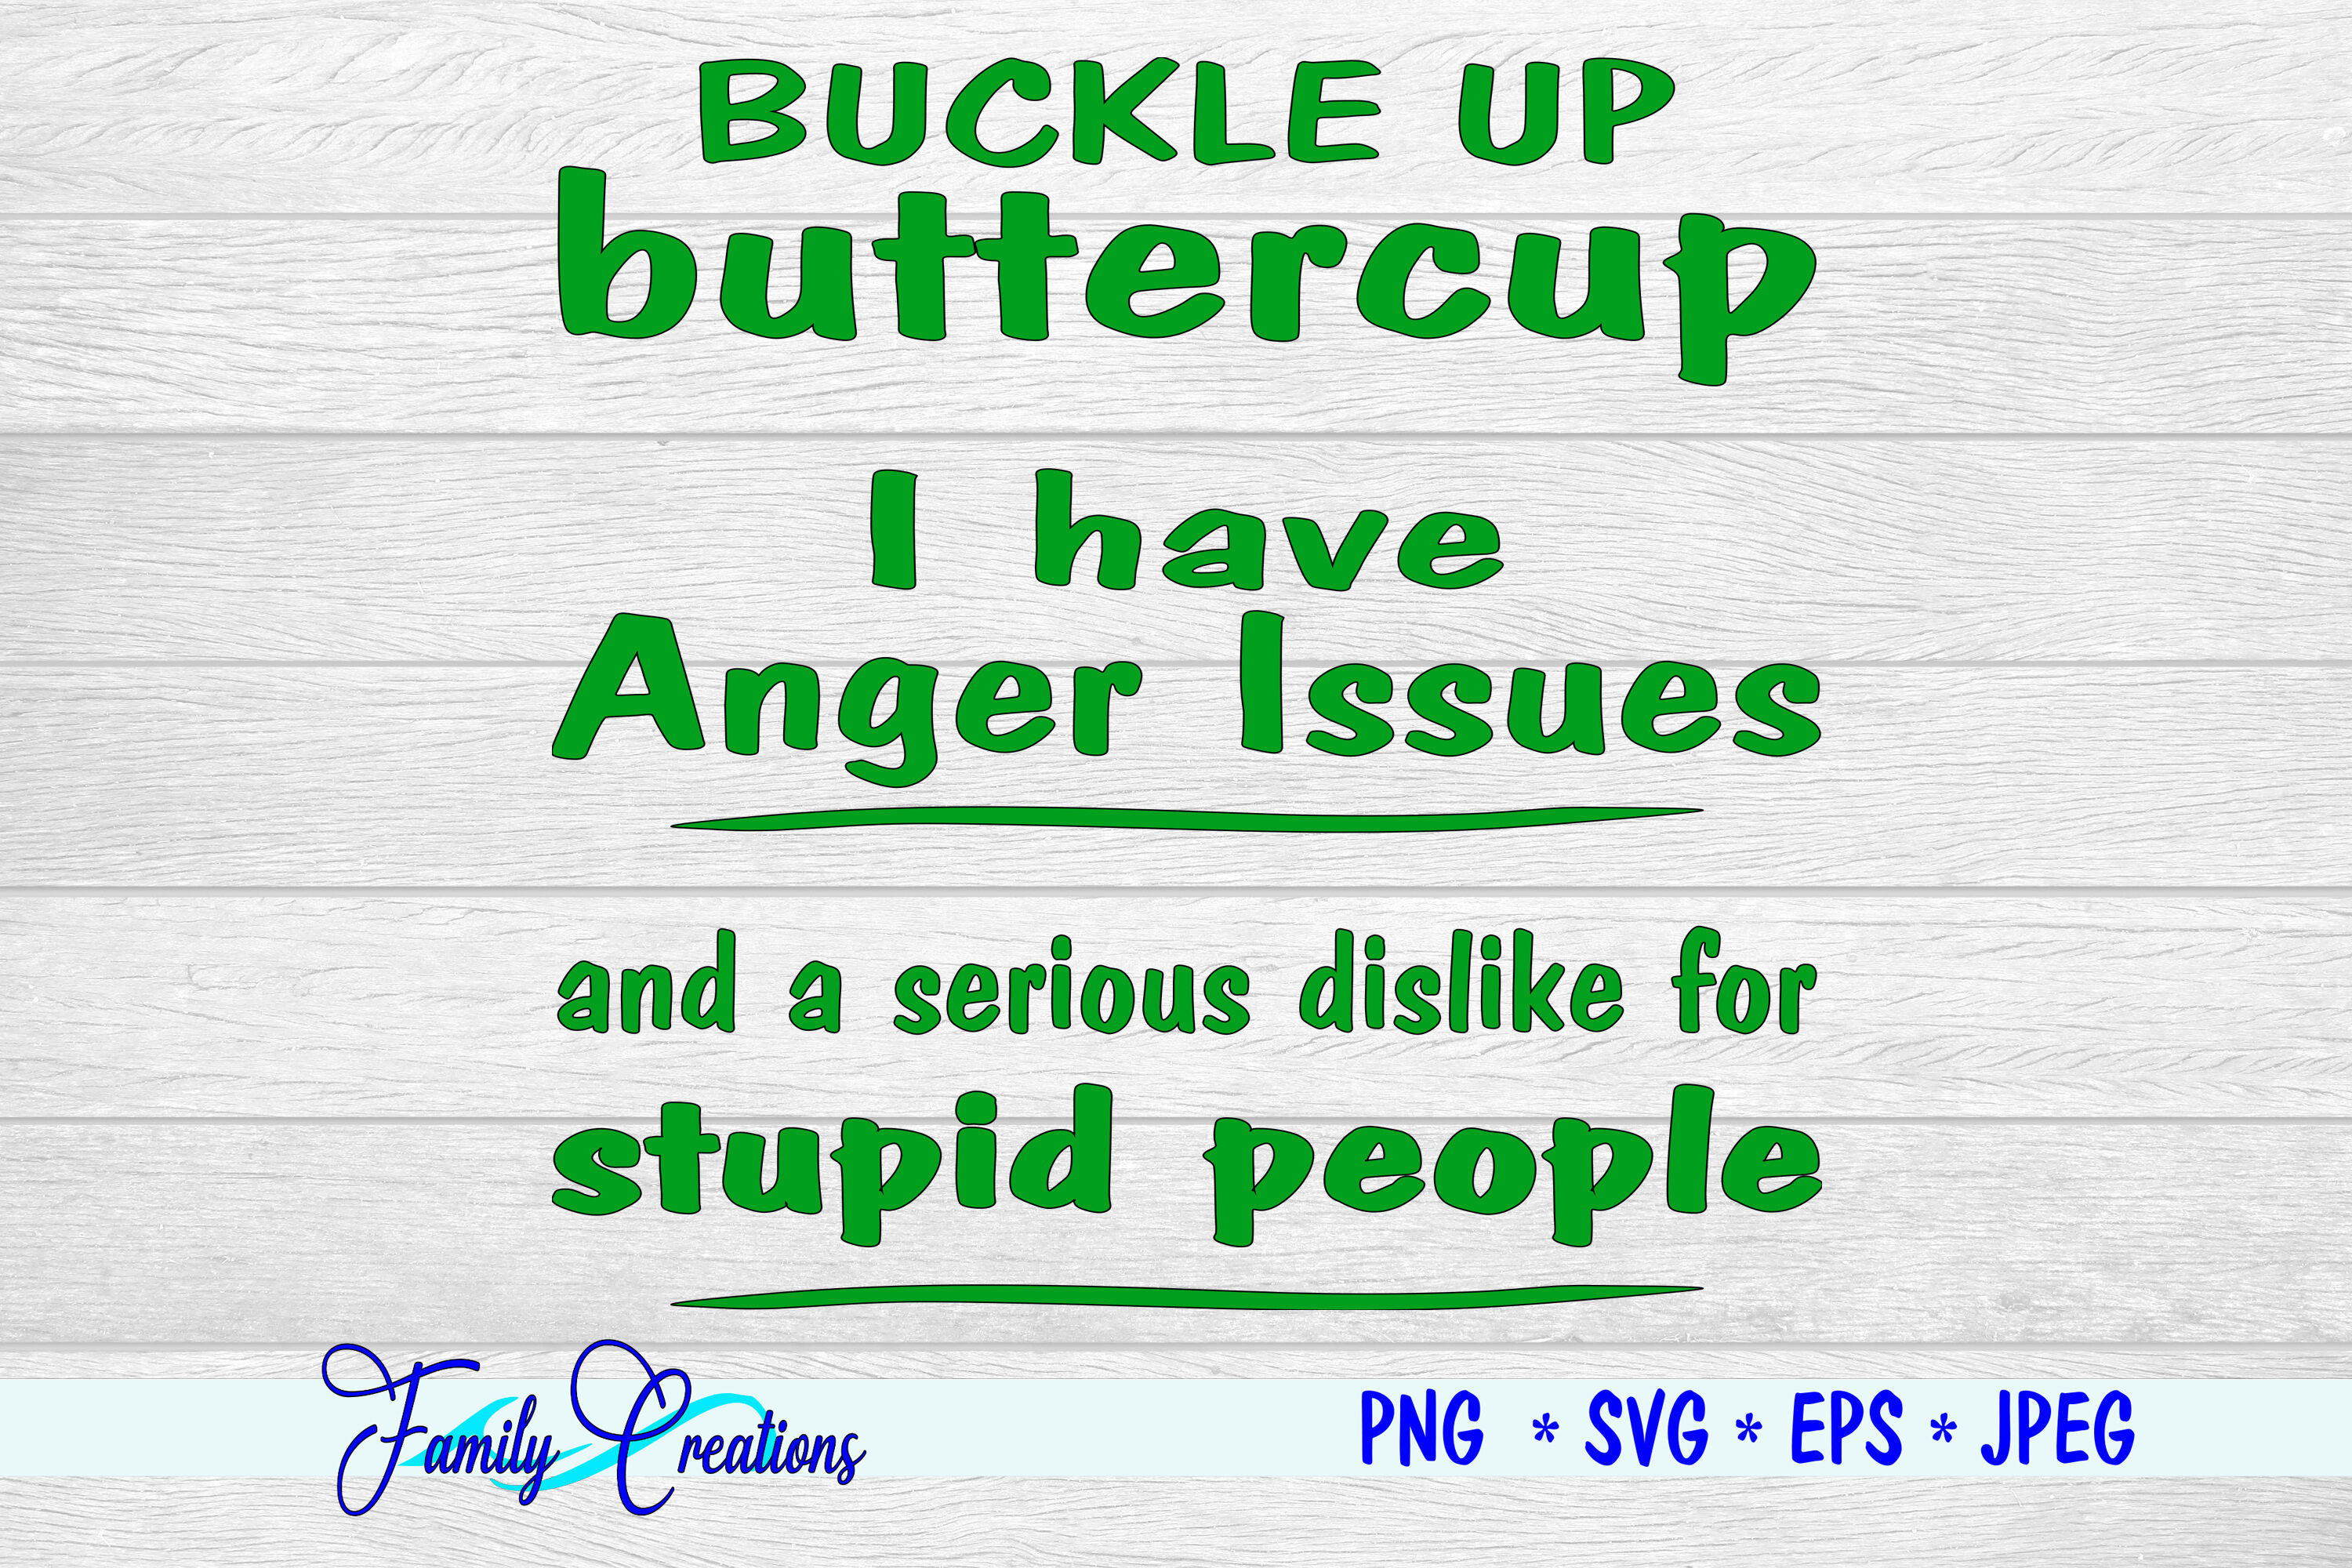 Buckle Up Buttercup I Have Anger Issues By Family Creations Thehungryjpeg Com